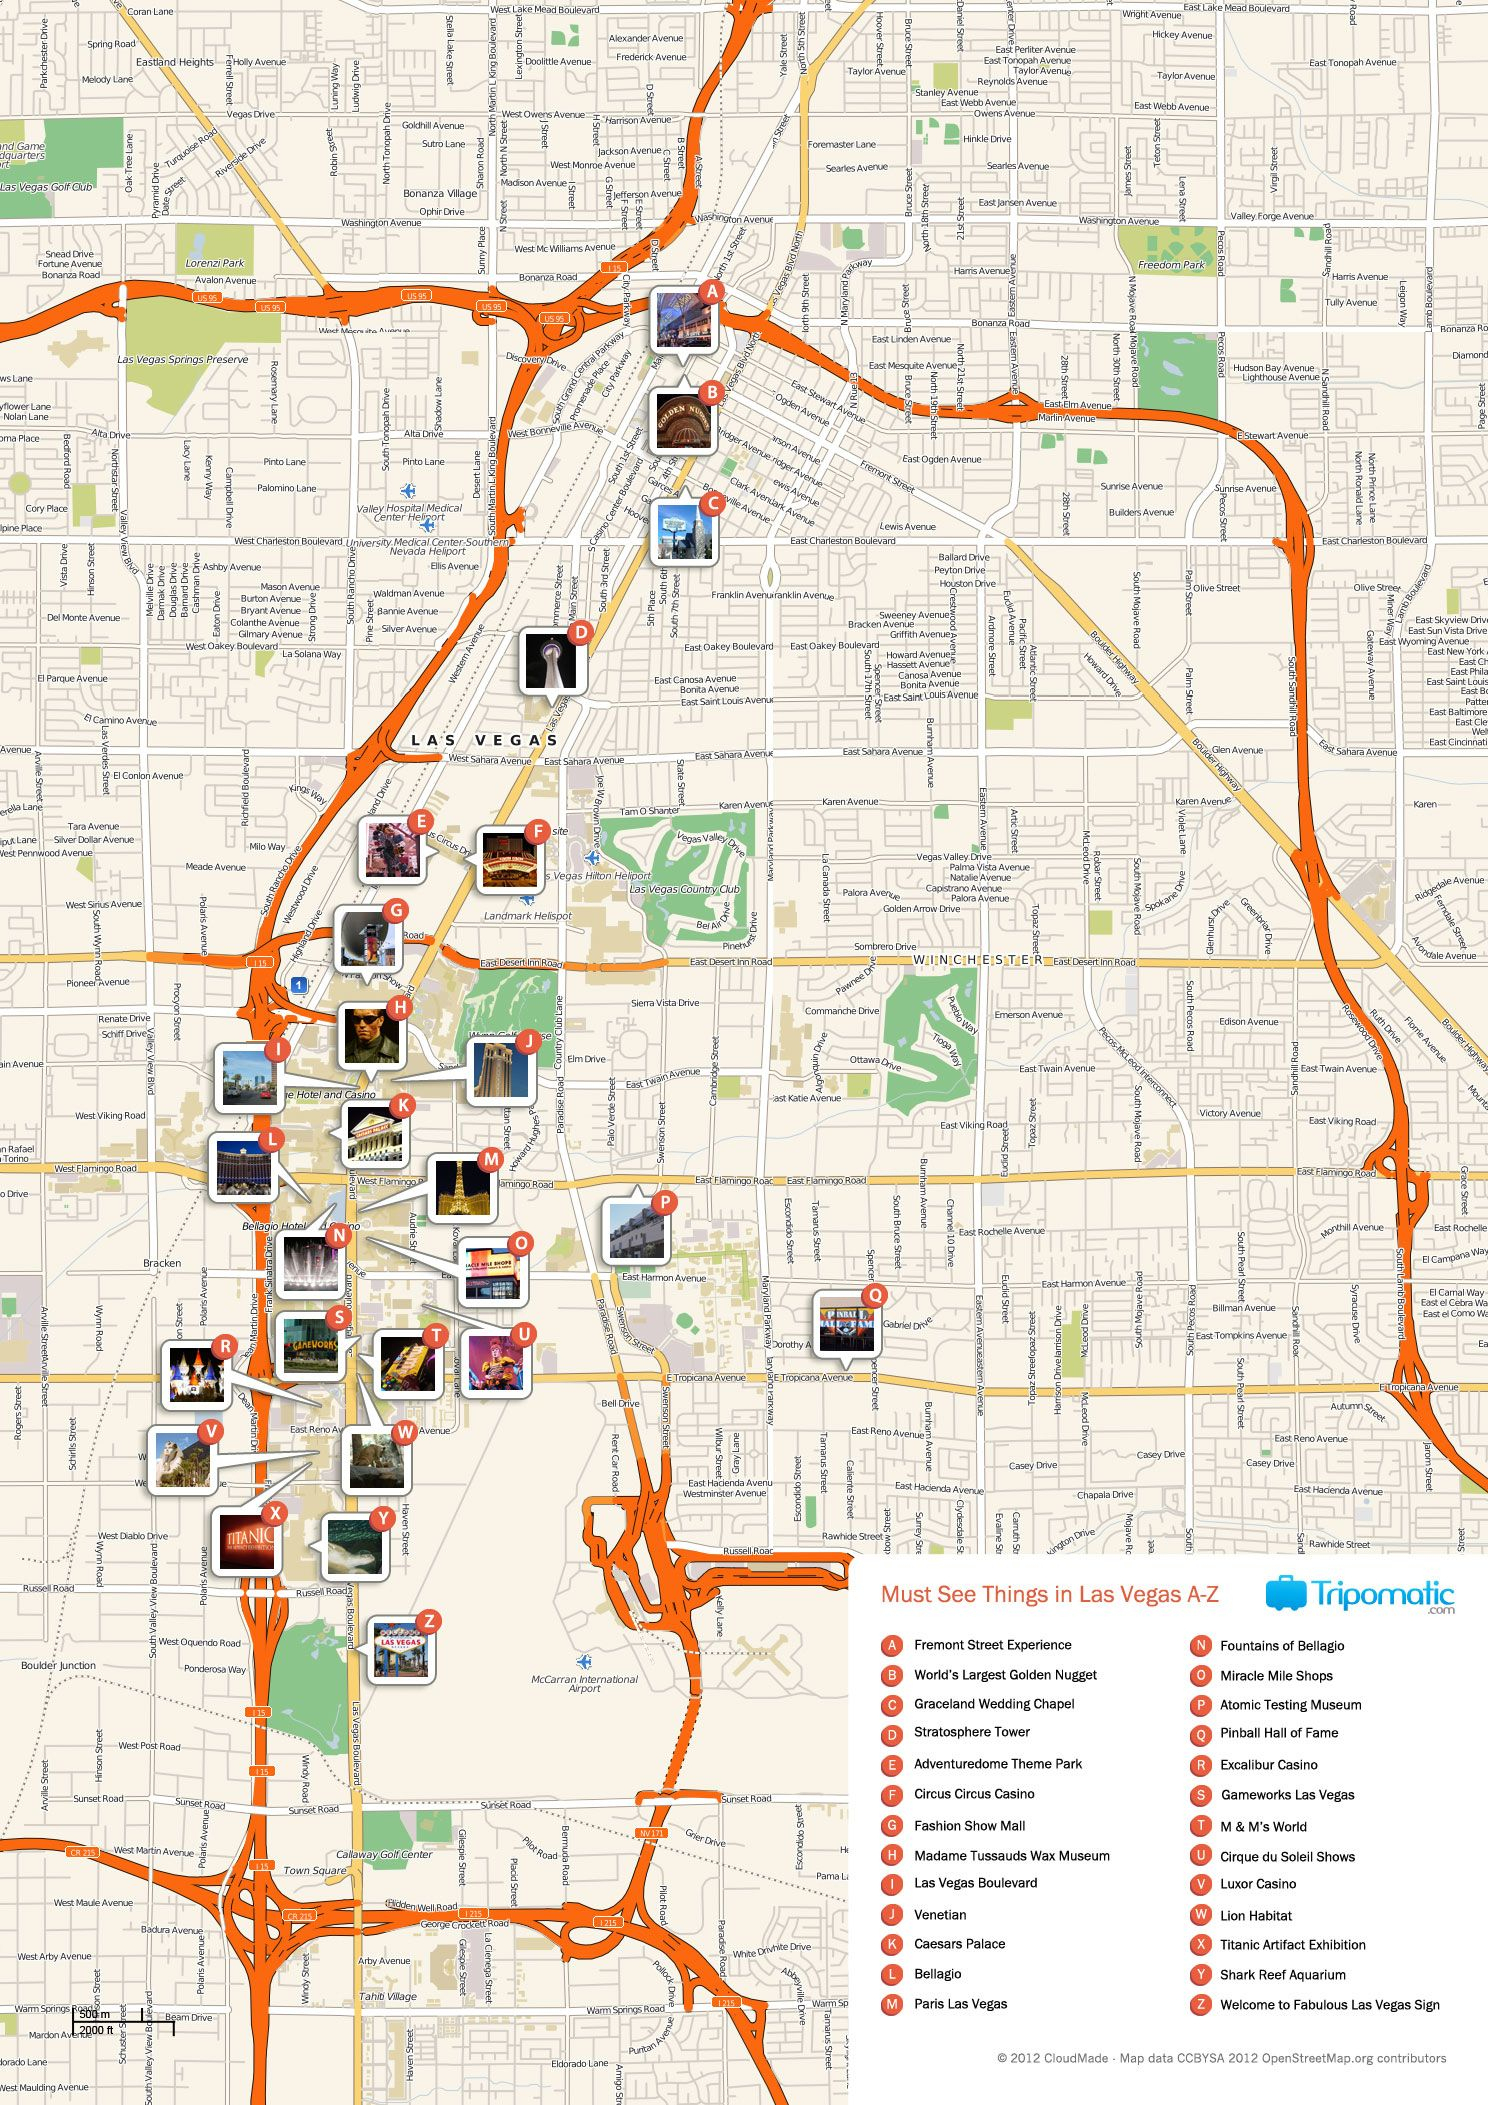 Free Printable Map Of Las Vegas Attractions. | Free Tourist Maps - Las Vegas Printable Map